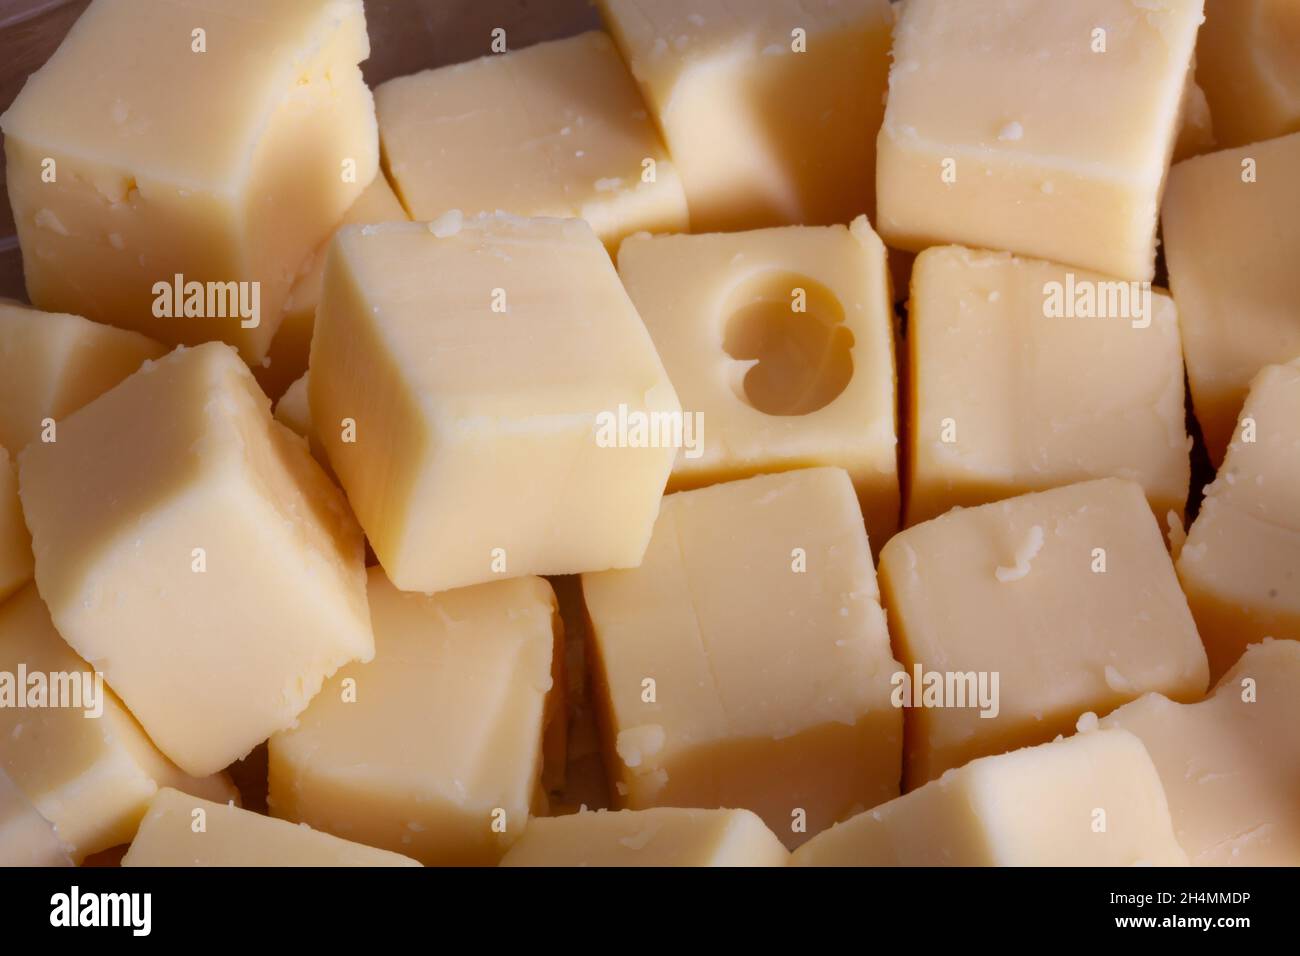 Closeup shot of a pile of square-cut cheese pieces Stock Photo